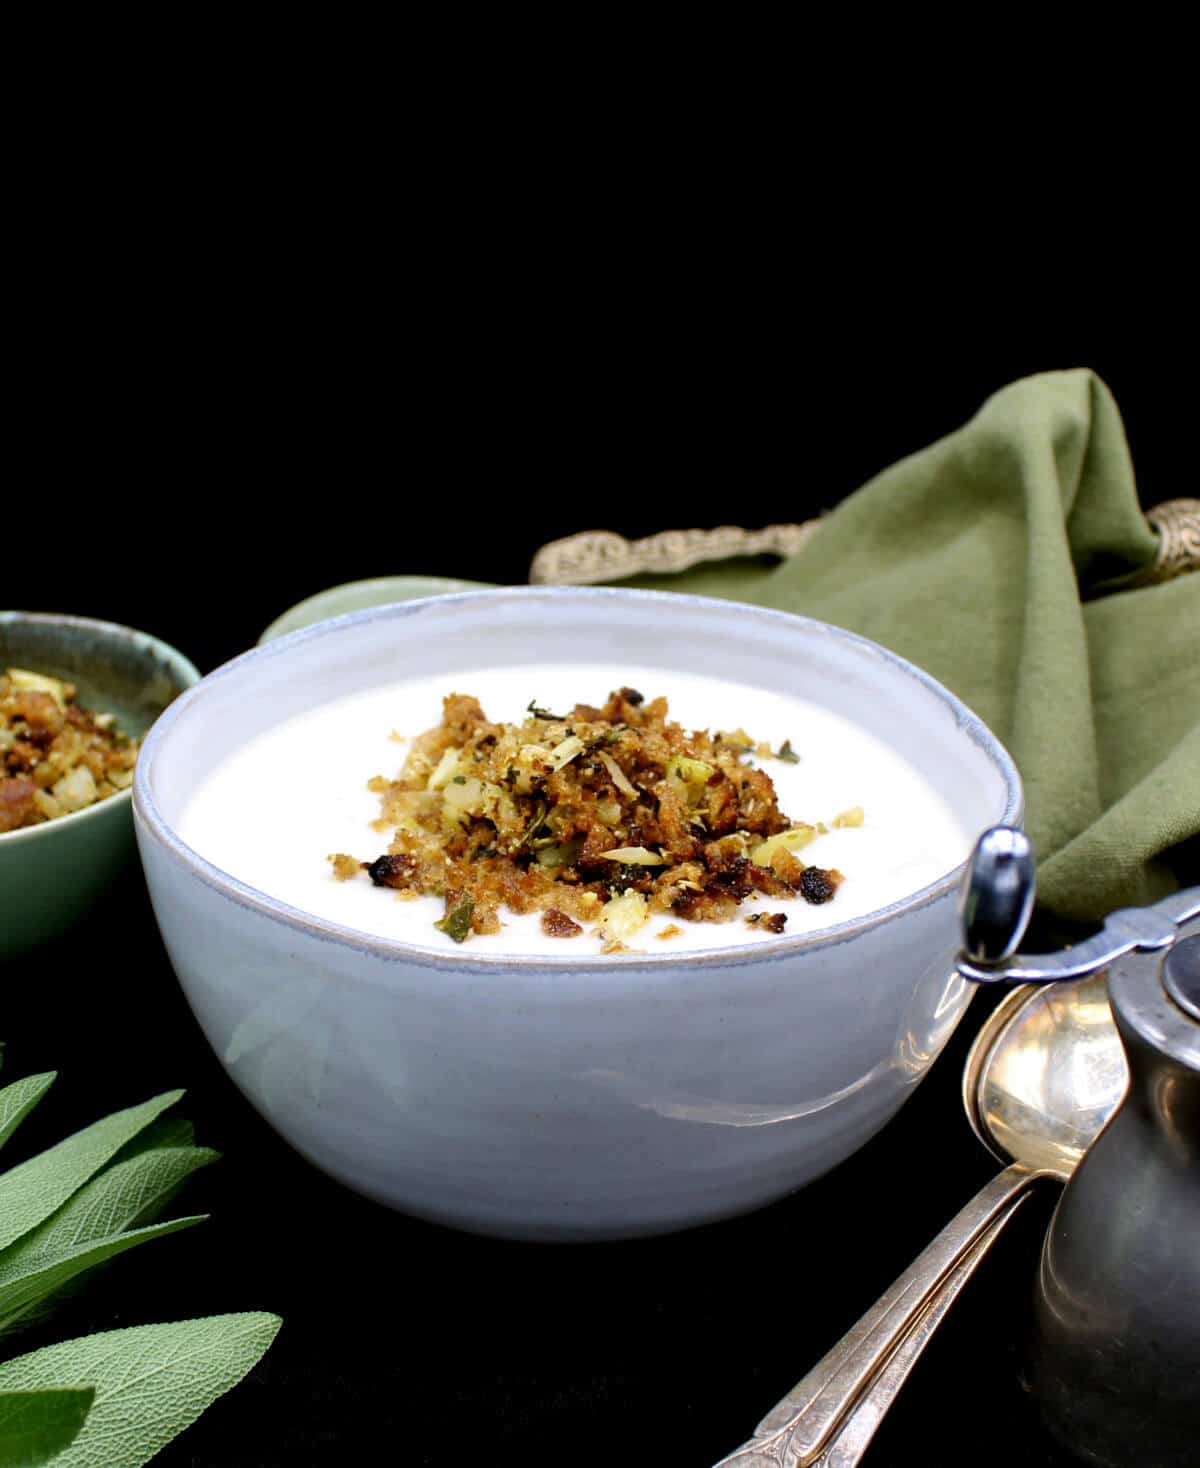 Creamy vegan cauliflower soup in a gray ceramic bowl with crunchy golden breadcrumb topping, with sage leaves, silverware, a pepper grinder and a green napkin next to it.